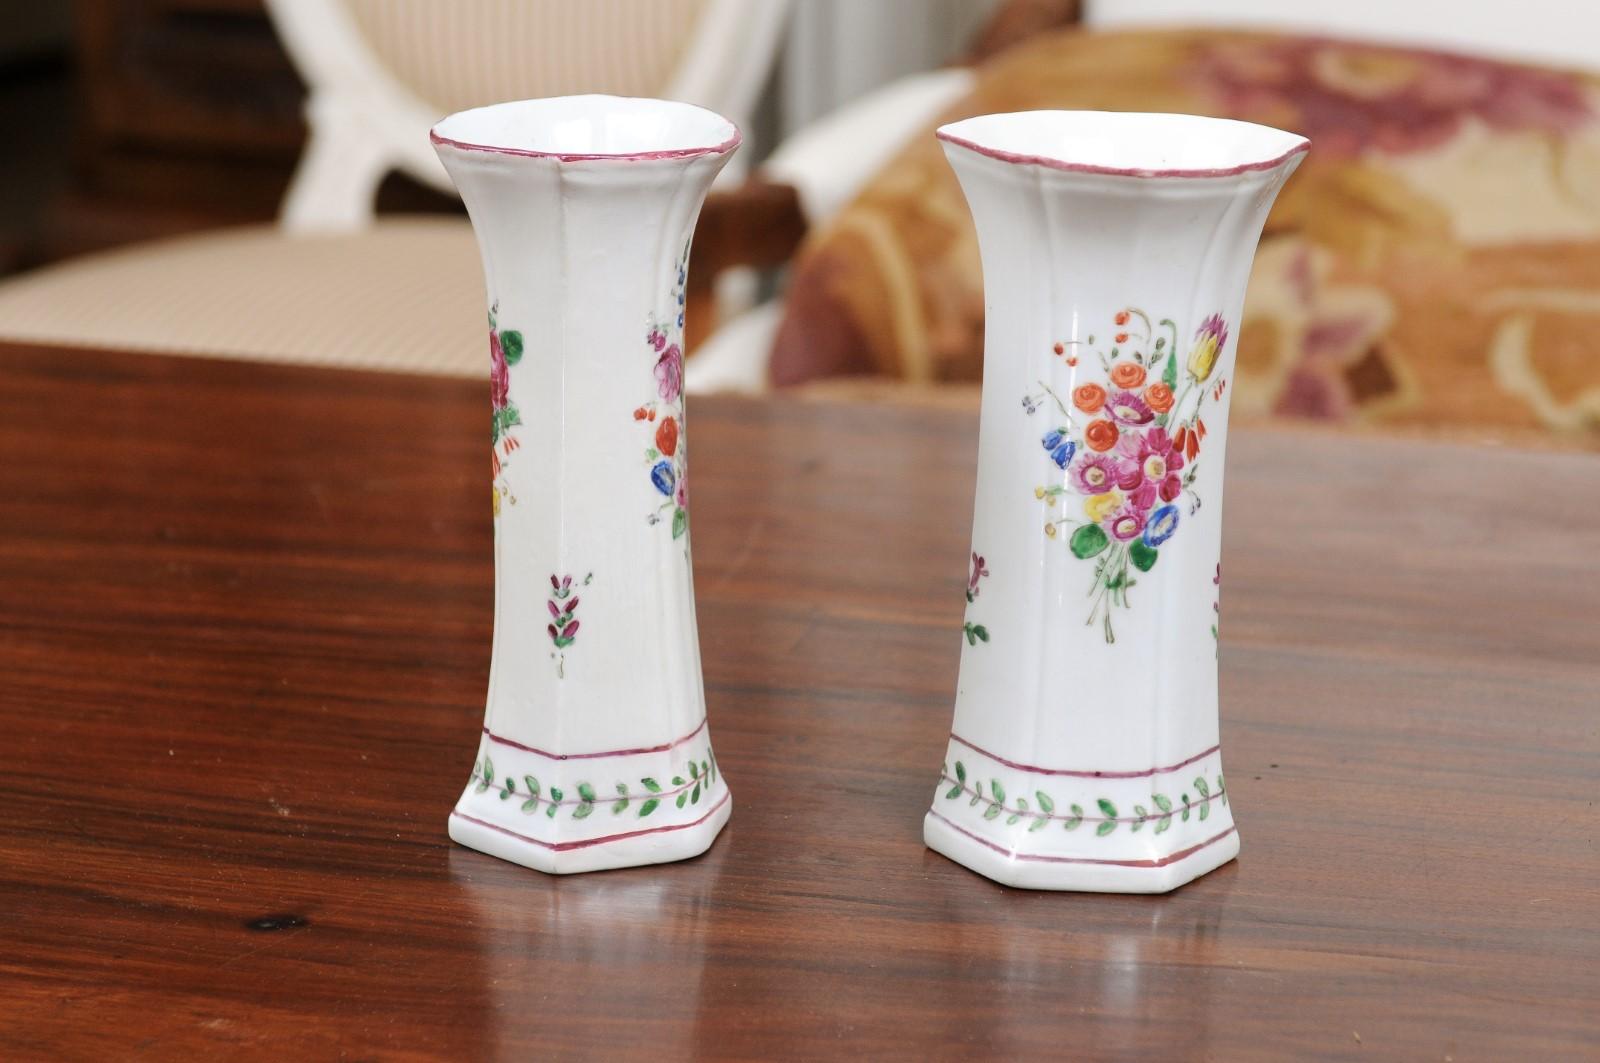 Pair of Italian Porcelain Vases with Colorful Painted Floral Motifs, circa 1805 For Sale 1